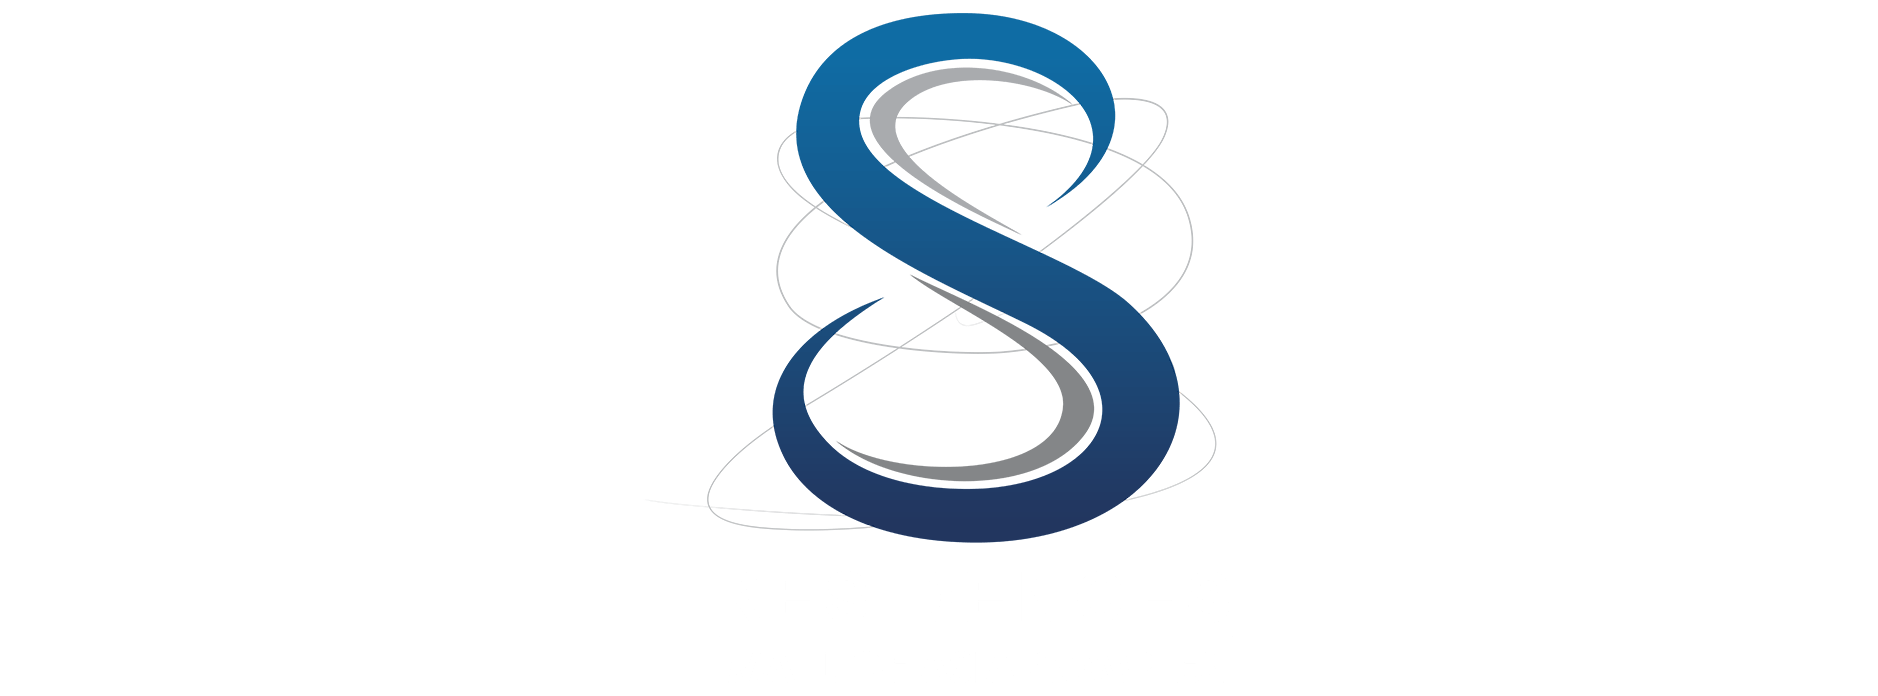 S a Name and Logo - S Residences